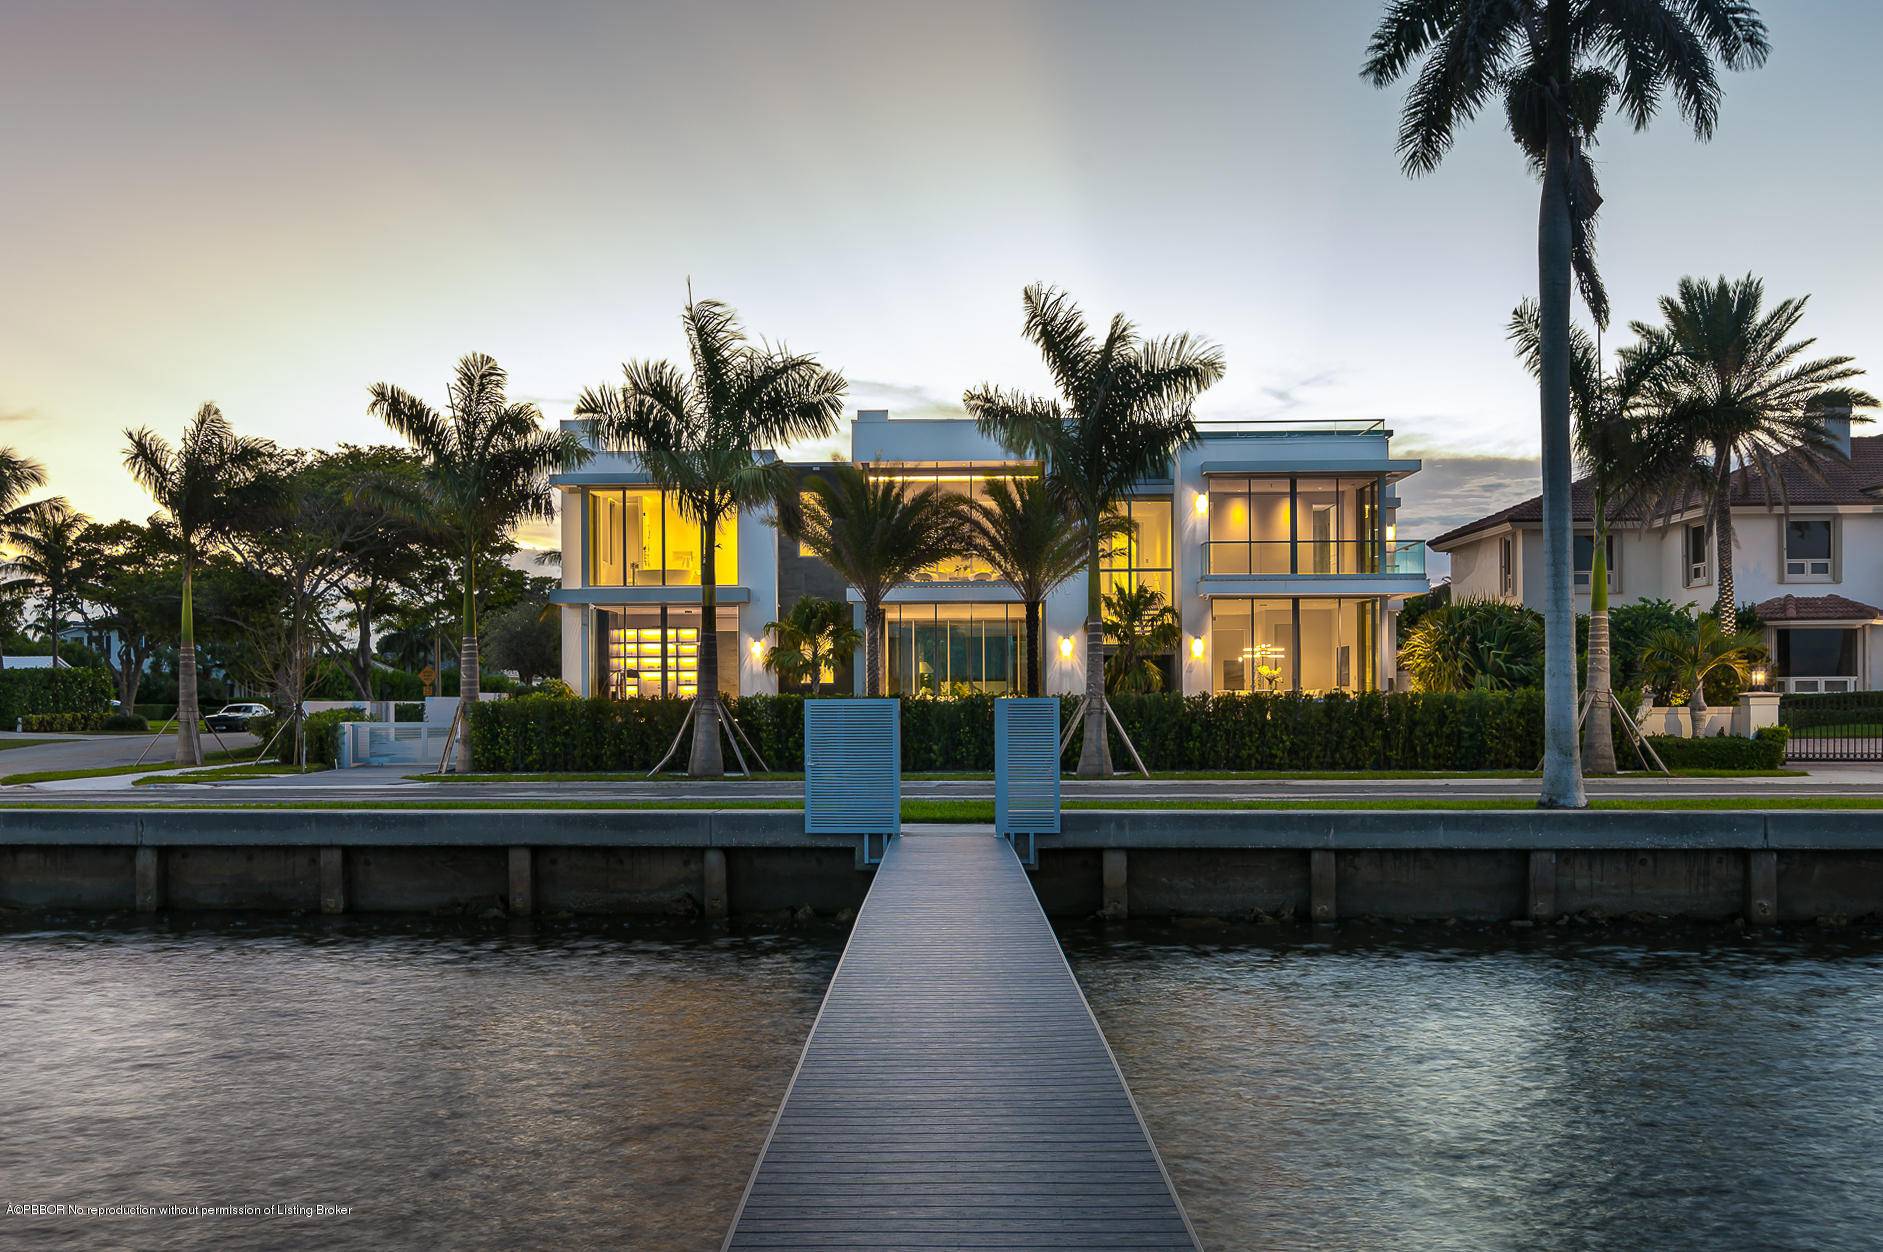 UNPARALLELED DESIGNUNMATCHED CONSTRUCTION6717 S Flagler Dr is one of the most distinctive properties ever built in Palm Beach County.